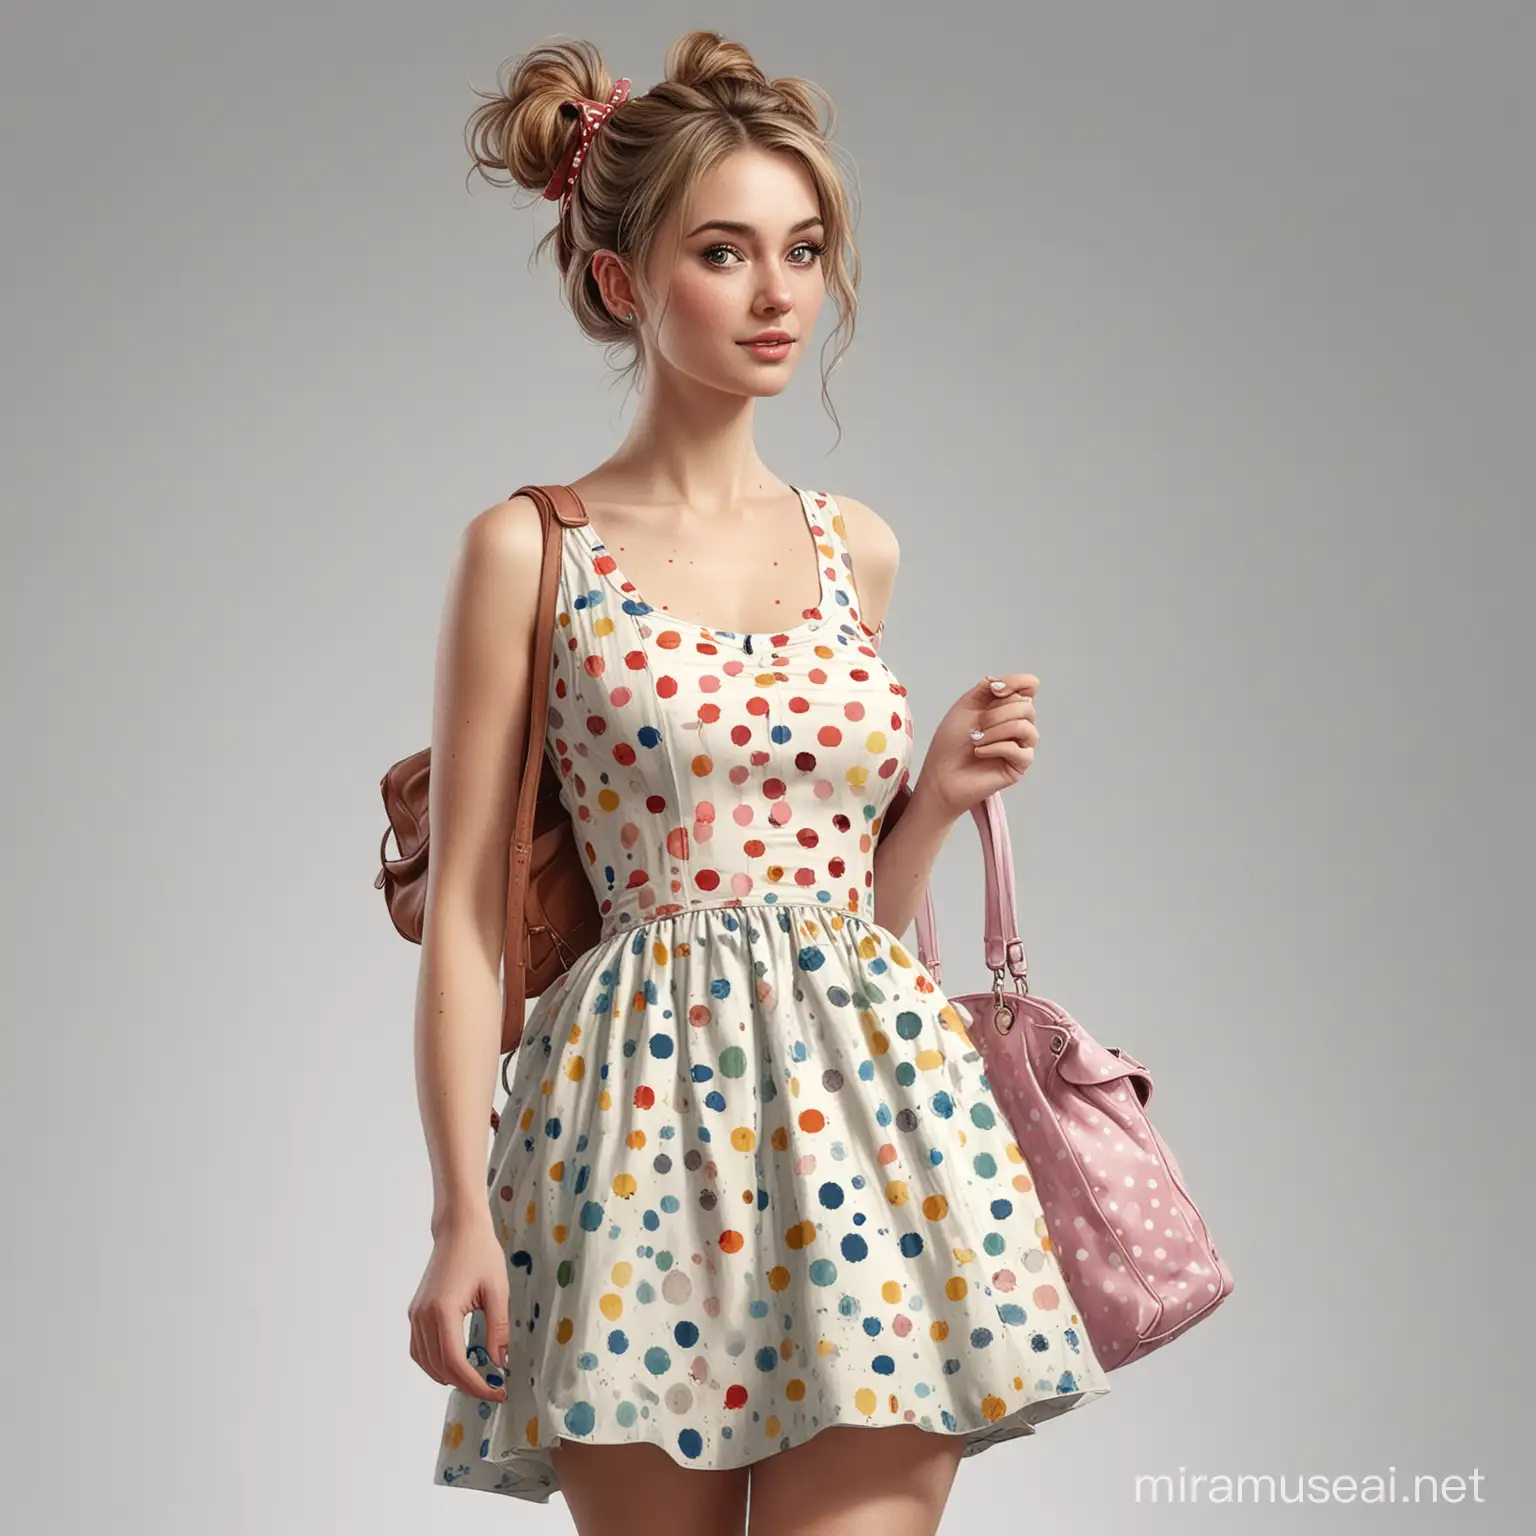 Stylish Woman with Messy Buns and Dotted Accessories in Inventive Cartoonish Design